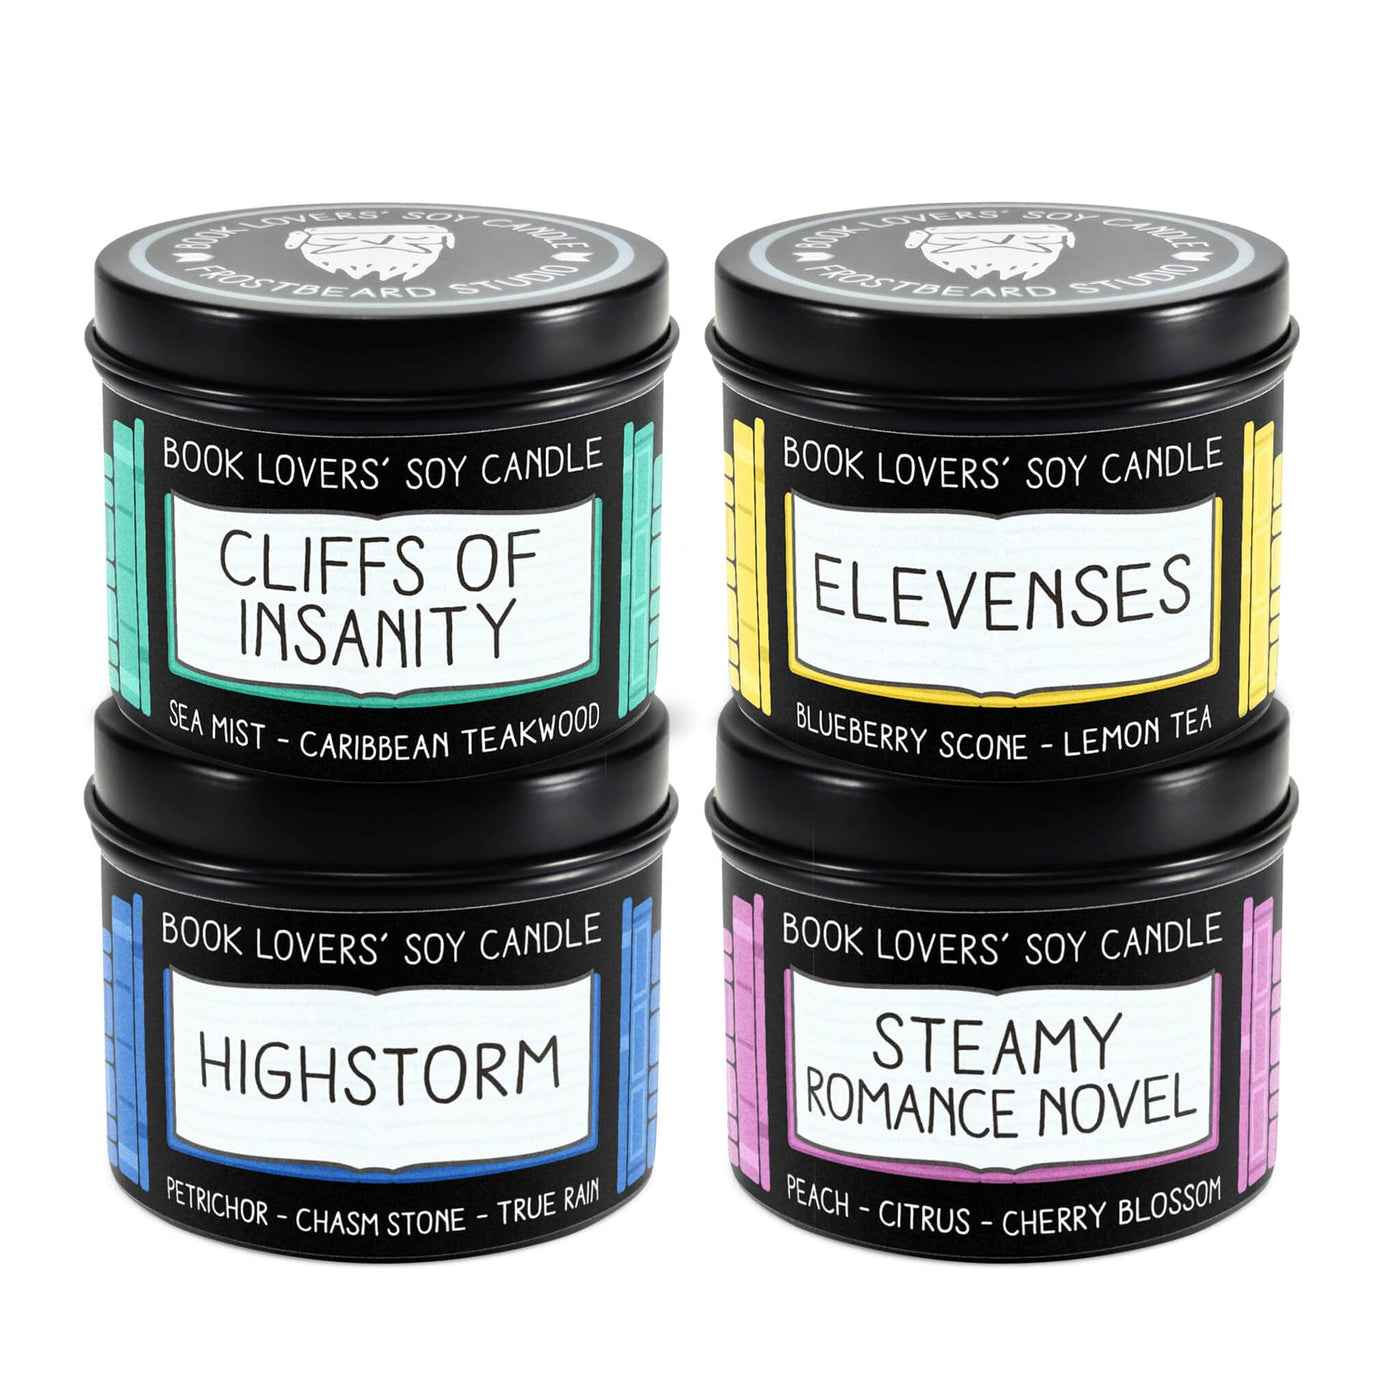 Summer Sample Pack - 4 oz Tins - Book Lovers' Soy Candles - Frostbeard Studio